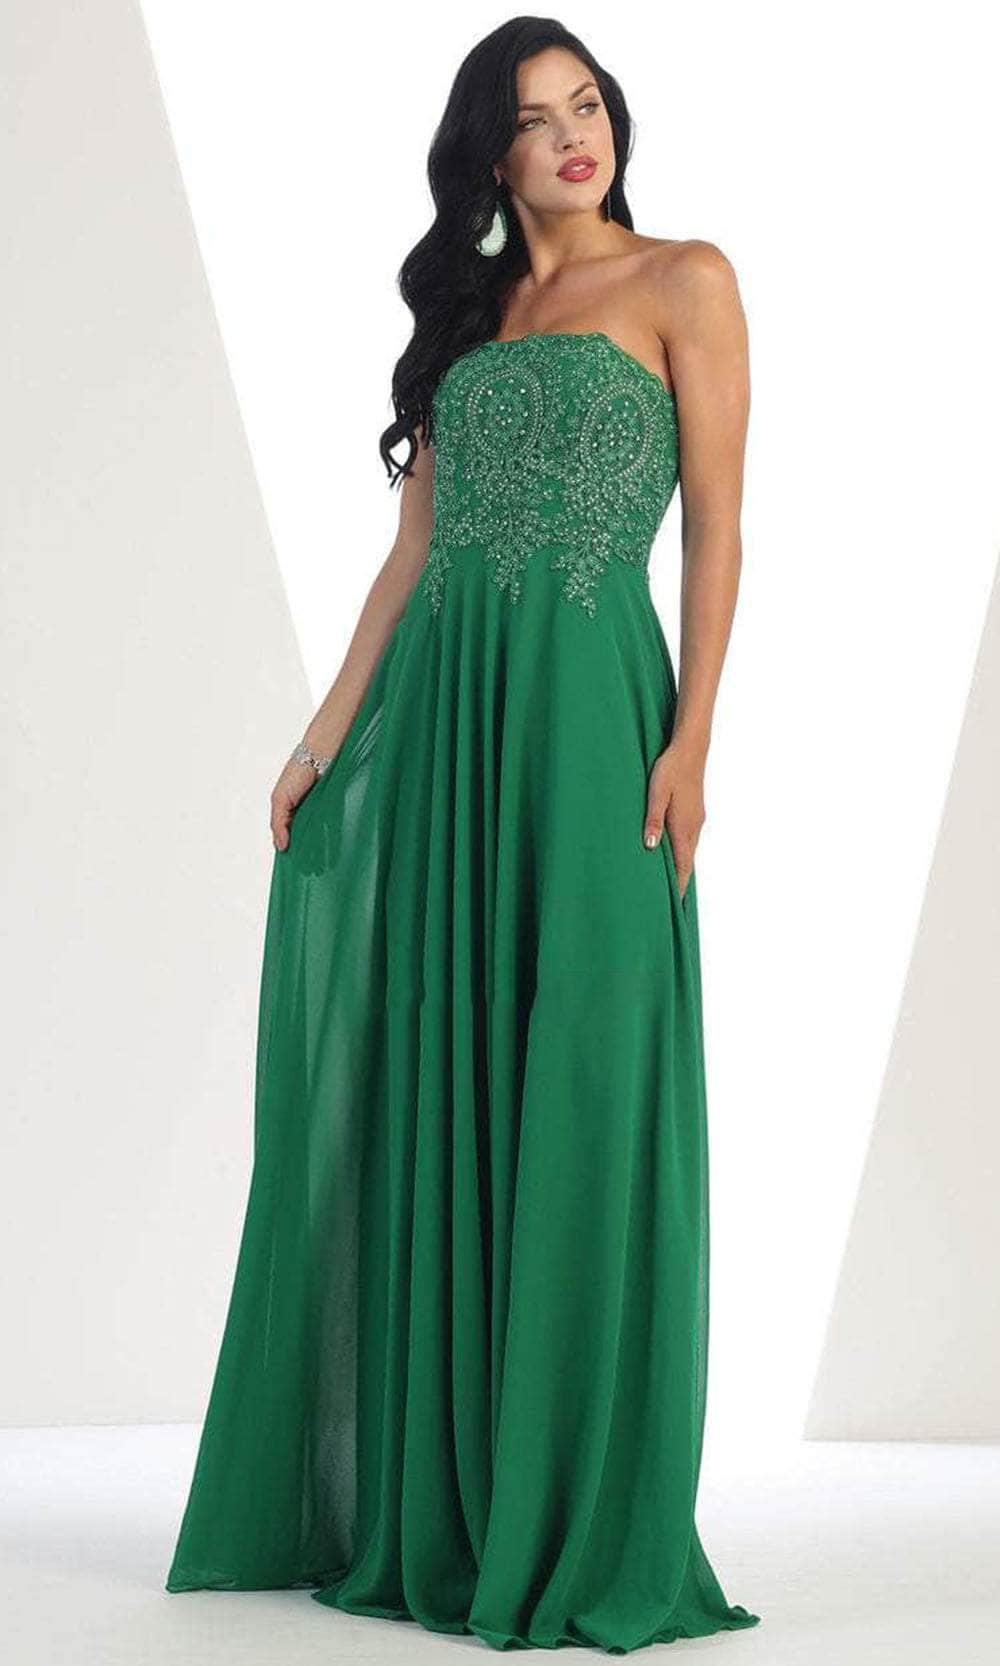 May Queen - MQ1277B Delicate Lace Strapless Corset Prom Gown Special Occasion Dress 22 / Emerald Gr